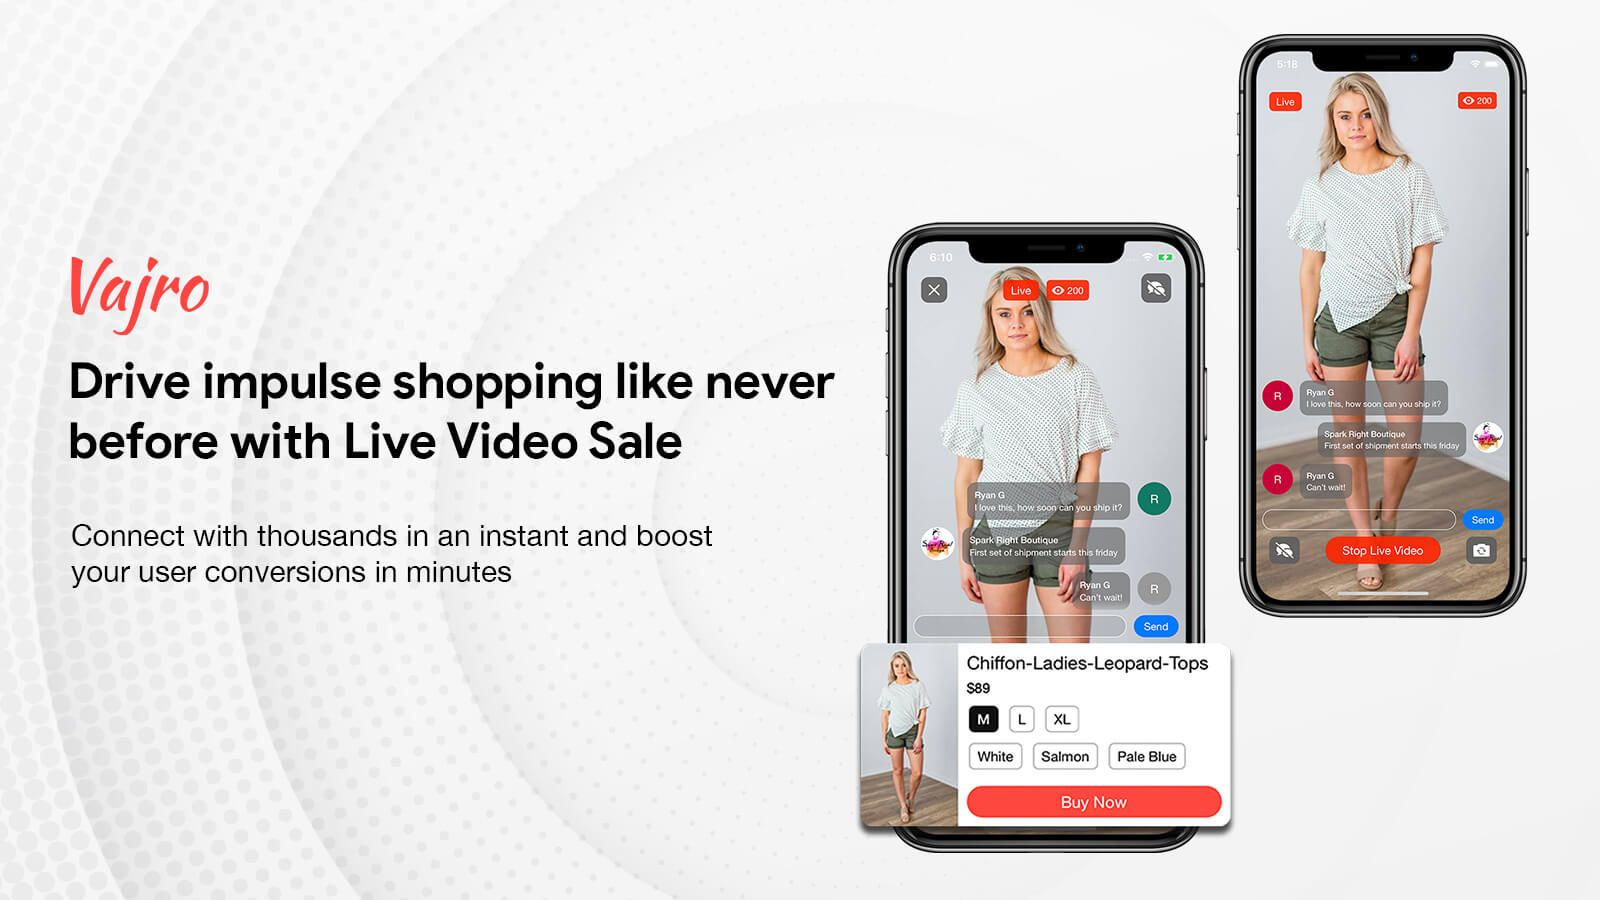 Drive impulse mobile app shopping with Live Video Sale